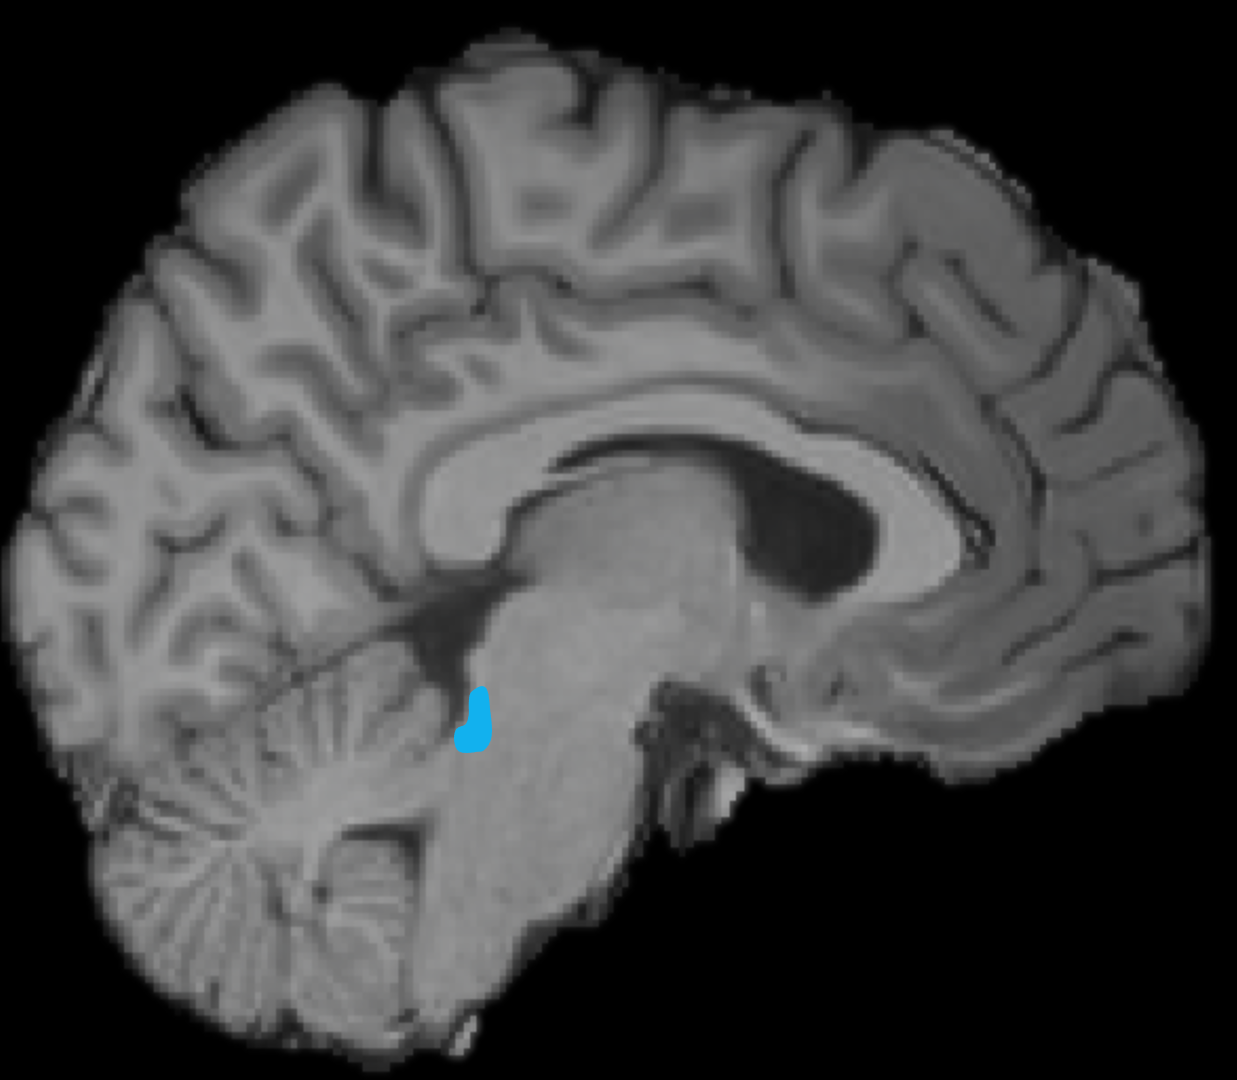 Enlarged view: MRI of a brain, a small area (in the lower half of the brain in the center) is marked in blue.